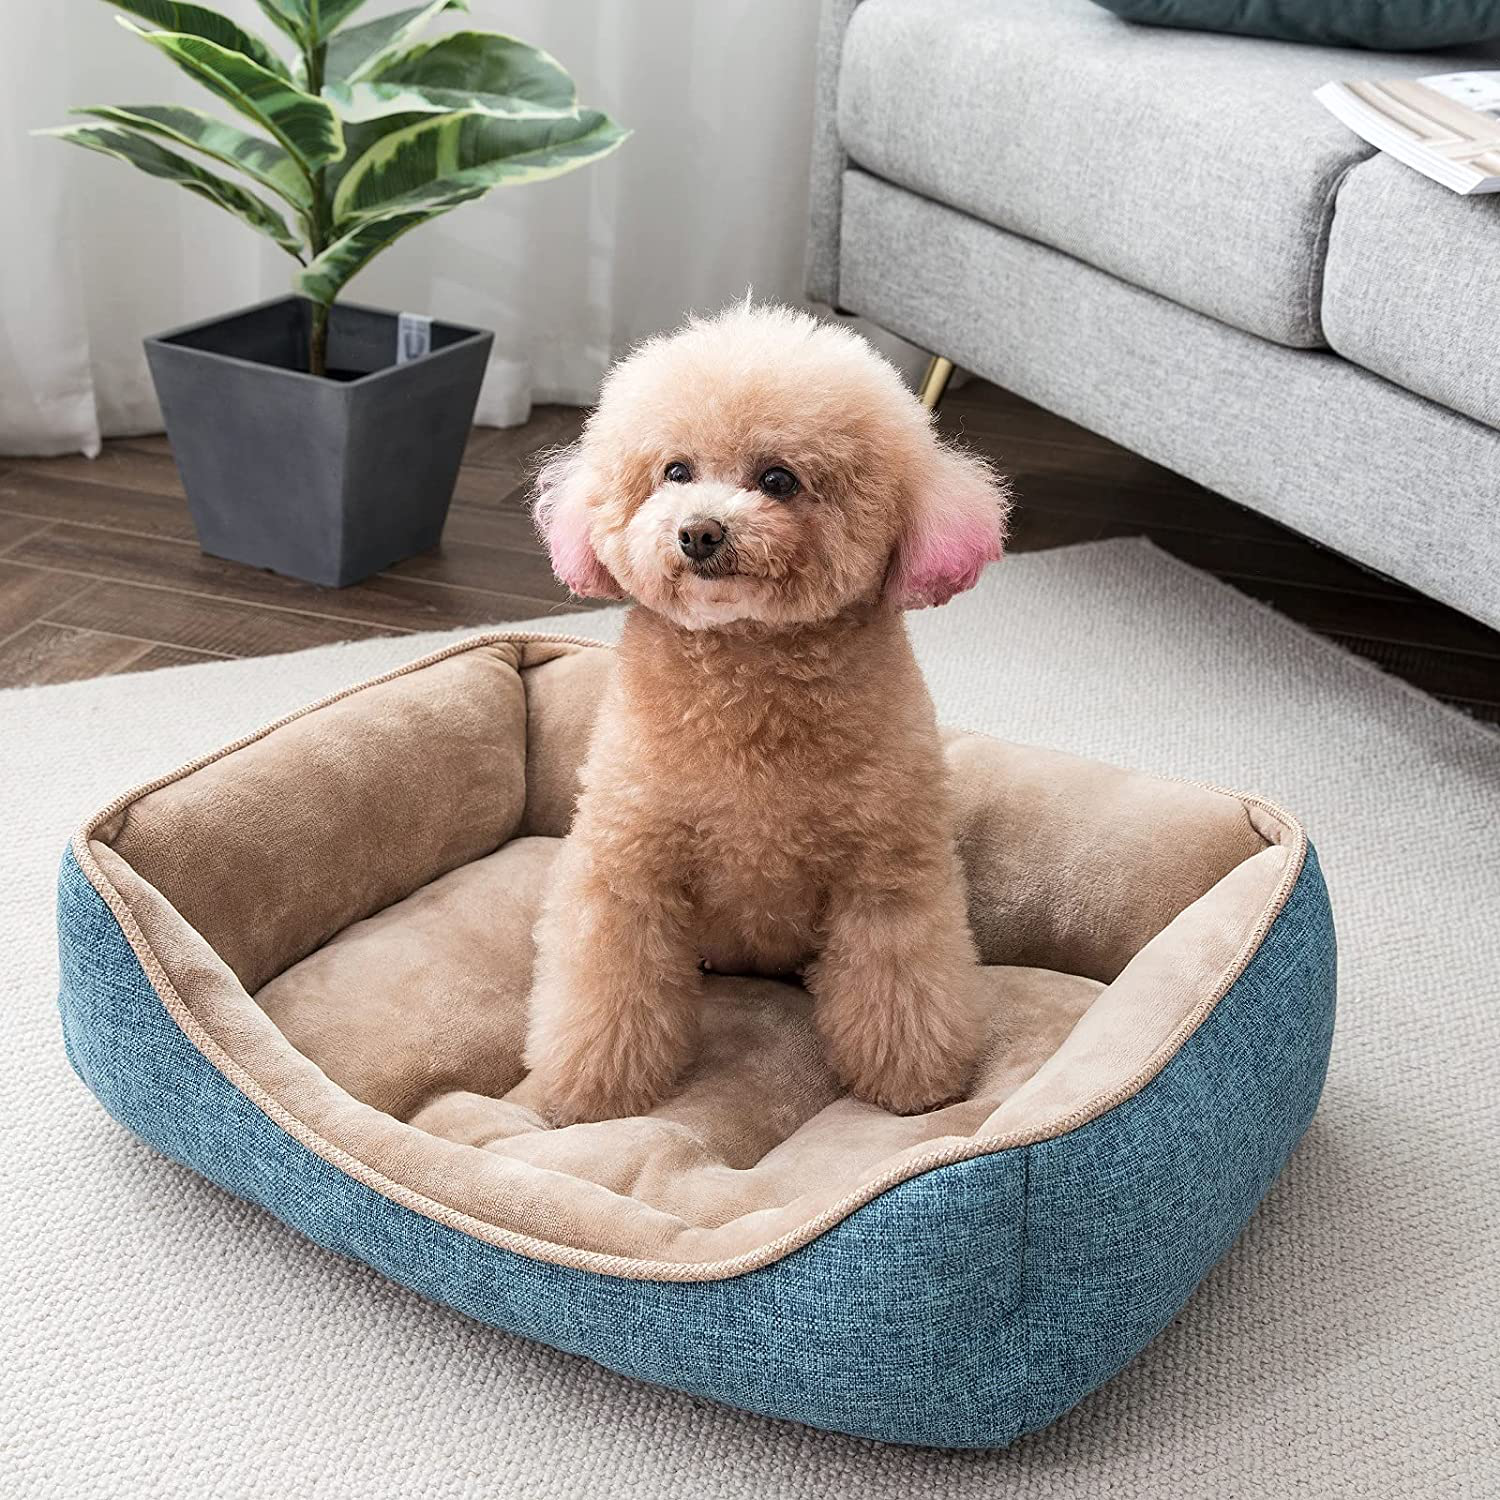 Perodo Square Dog Bed Sleeping Bed Pet Bed Pet Supplies Ultra Soft Anti-Slip and Durable Bed